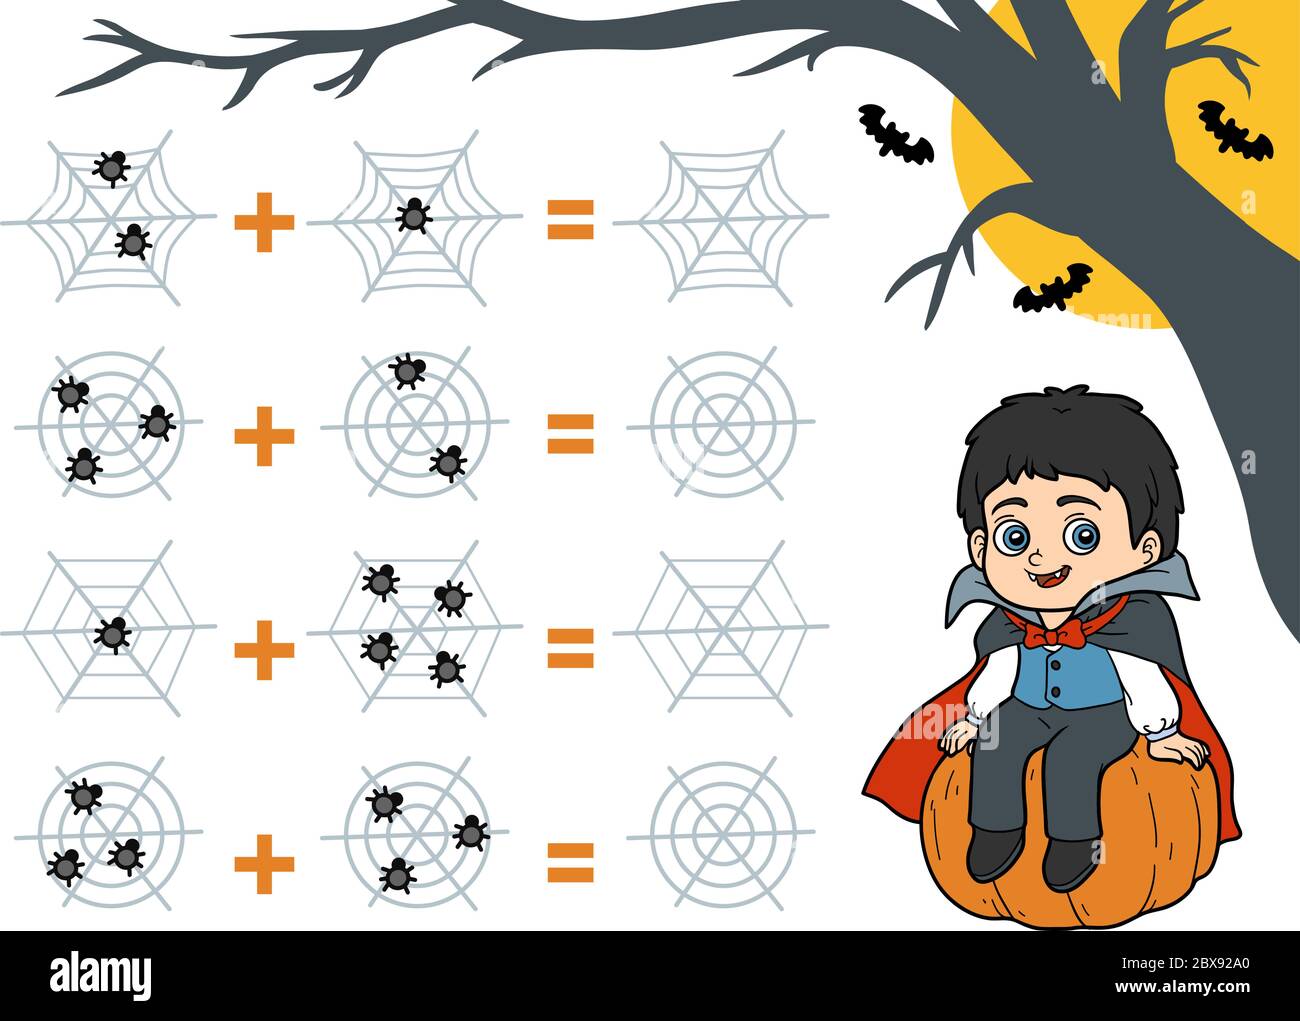 Counting Game for Preschool Children. Halloween characters, vampire. Educational a mathematical game. Stock Vector